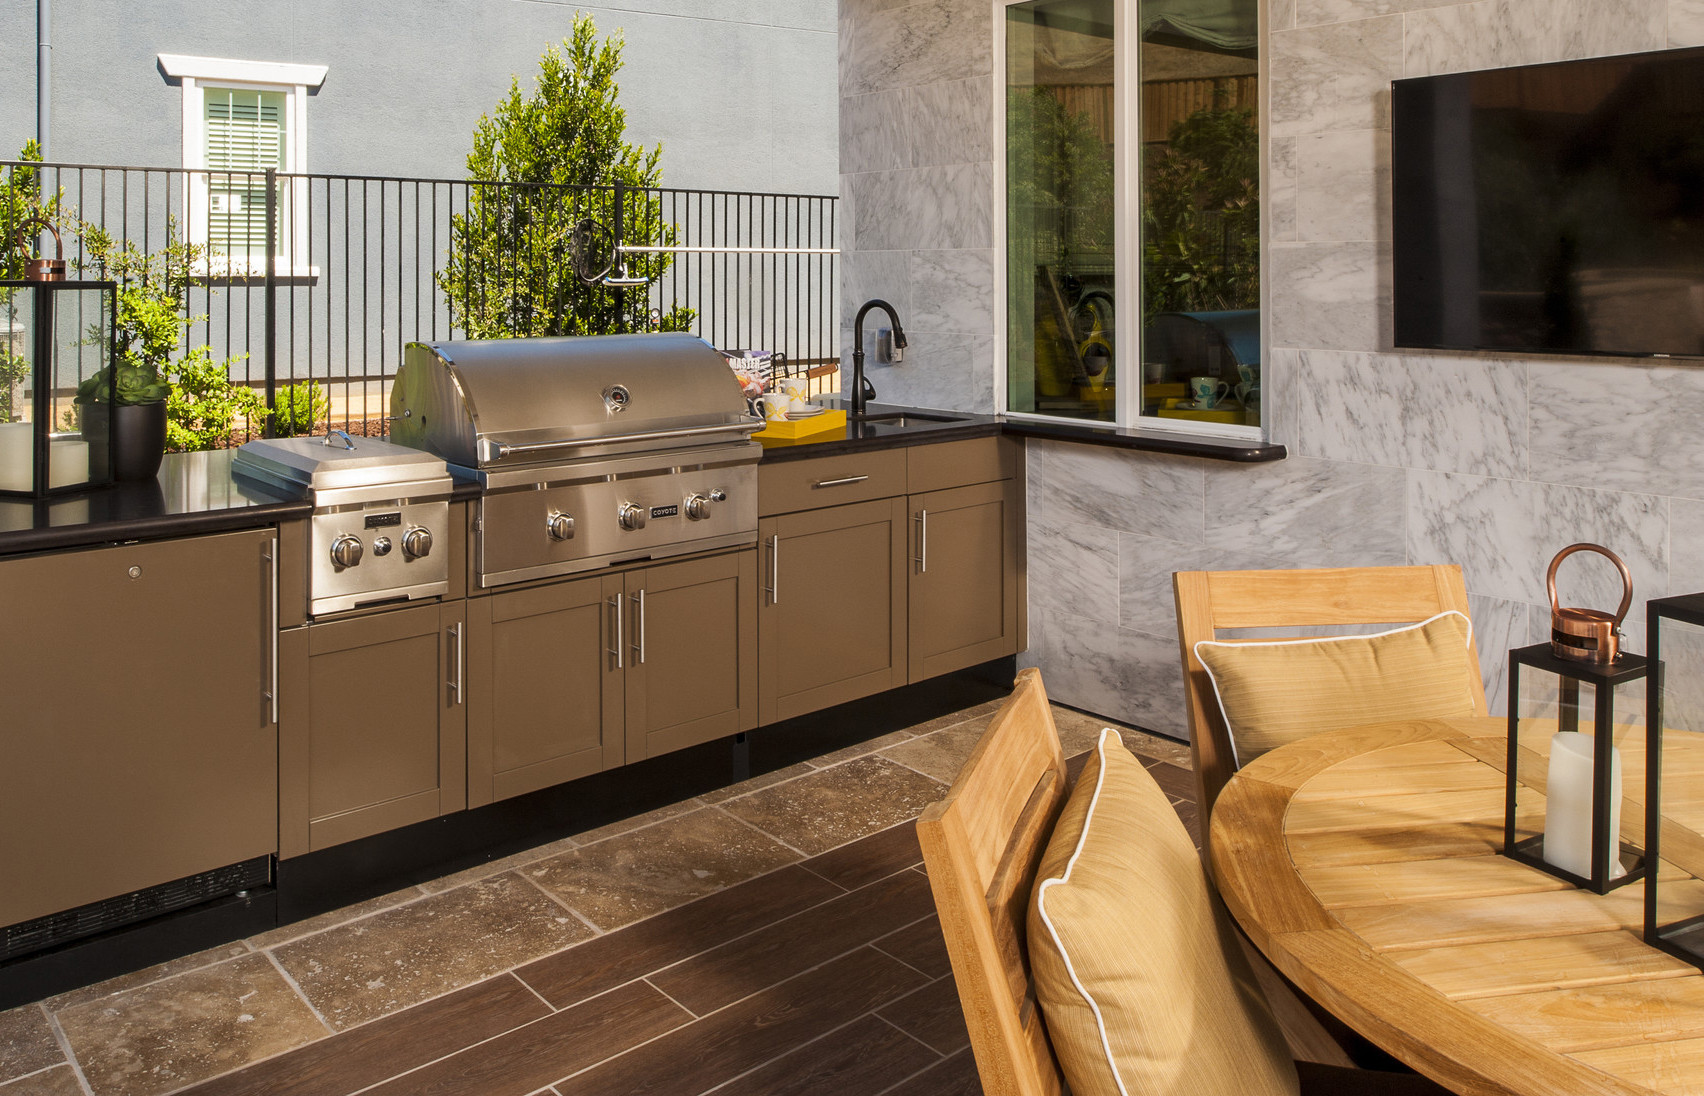 Outdoor Cabinets Kitchen
 Stainless Steel Base Cabinets for Outdoor Kitchens